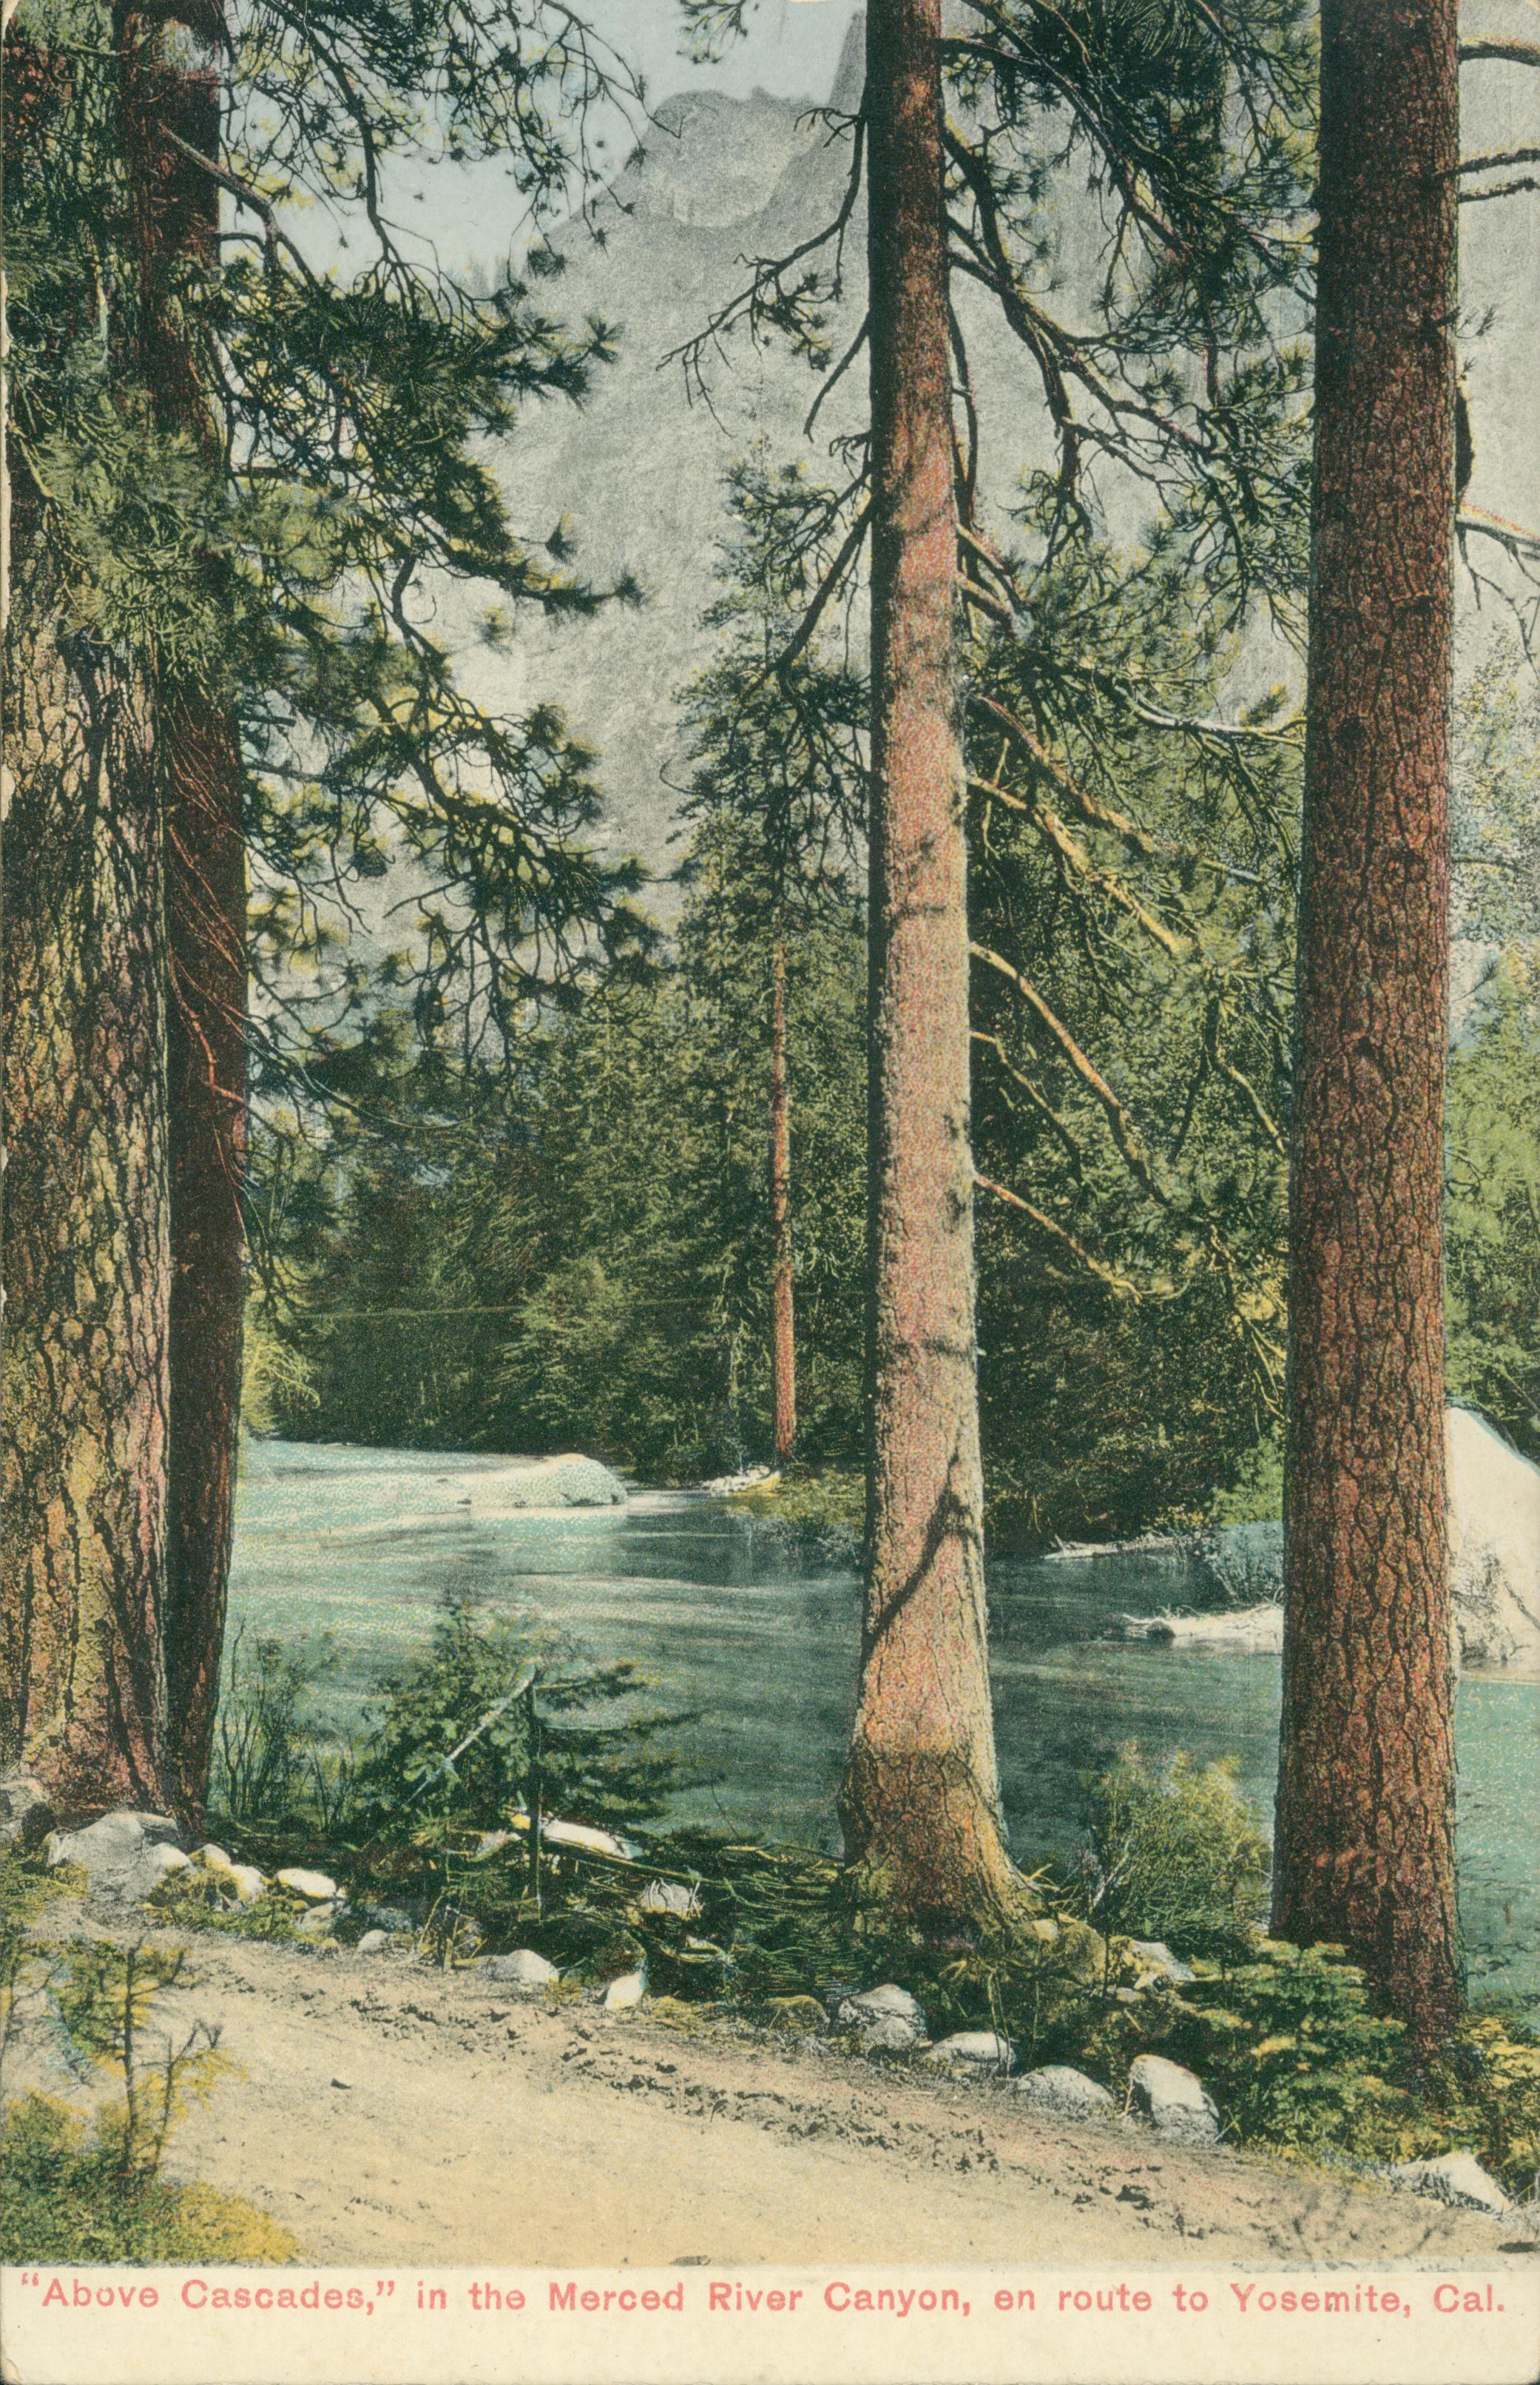 Shows a road lined by trees running along the shores of the Merced River